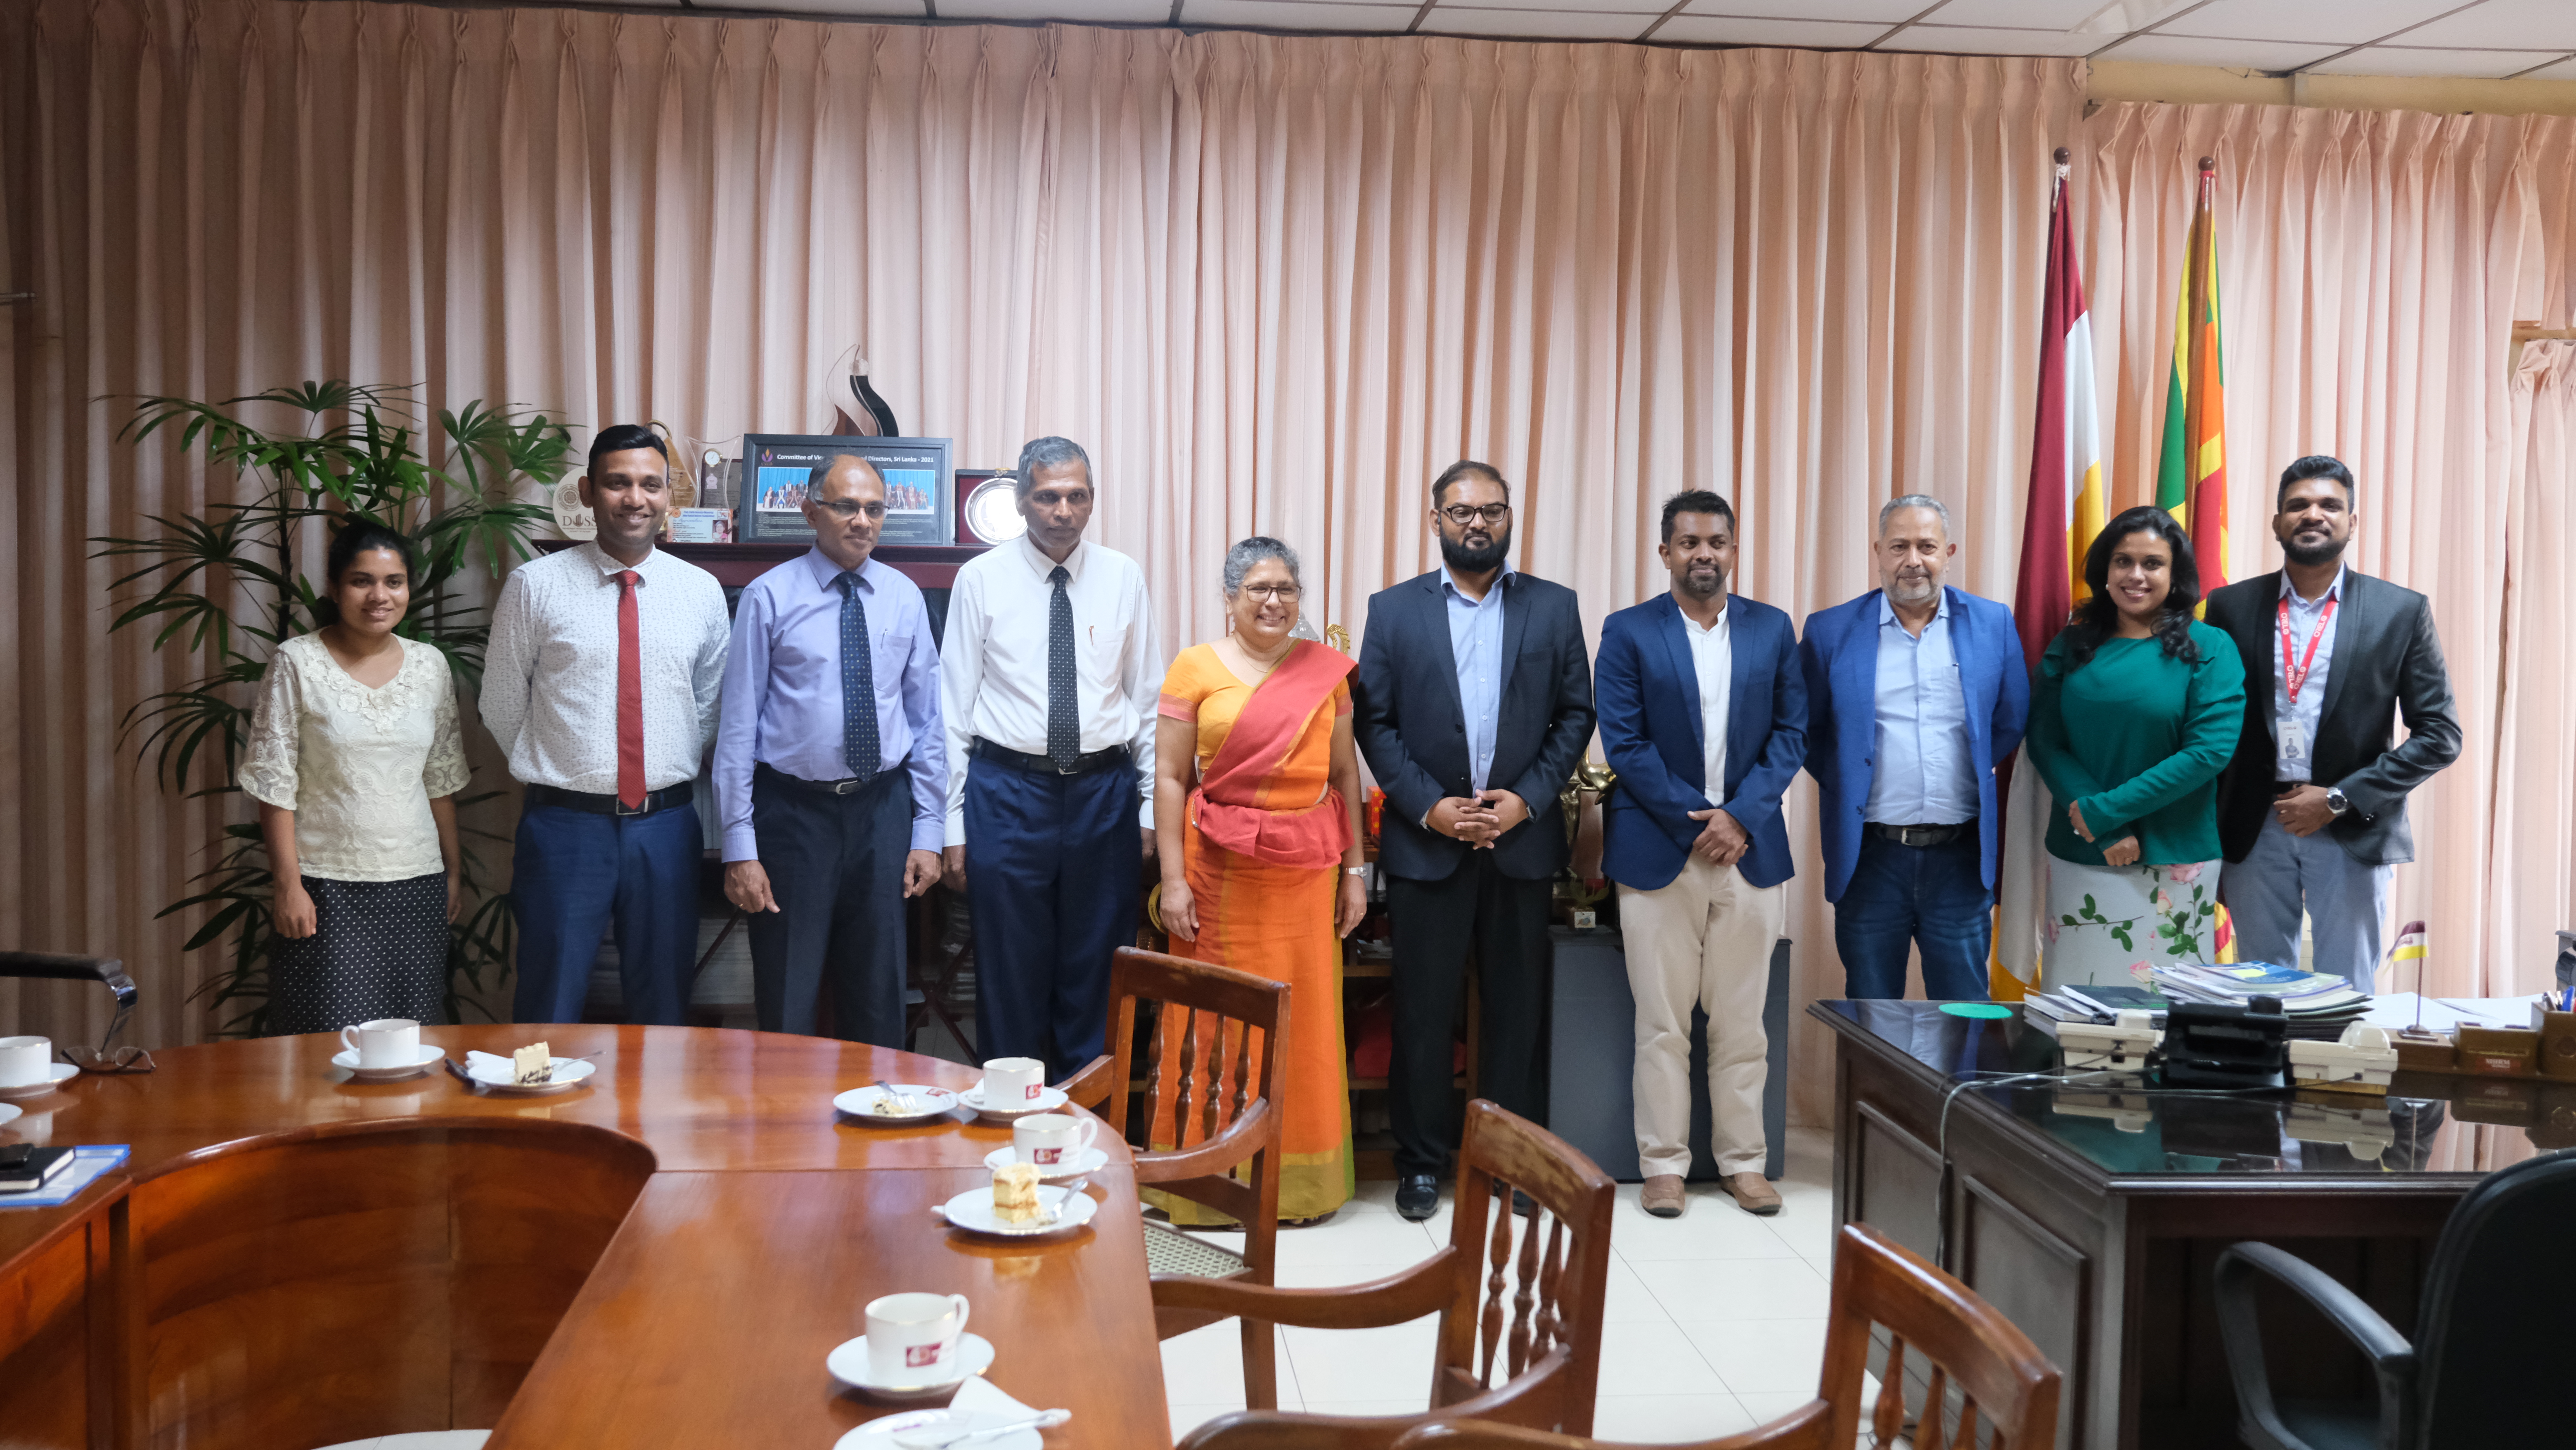 MoU SIGNED BETWEEN Orel IT AND THE DEPARTMENT OF INDUSTRIAL MANAGEMENT, UNIVERSITY OF KELANIYA